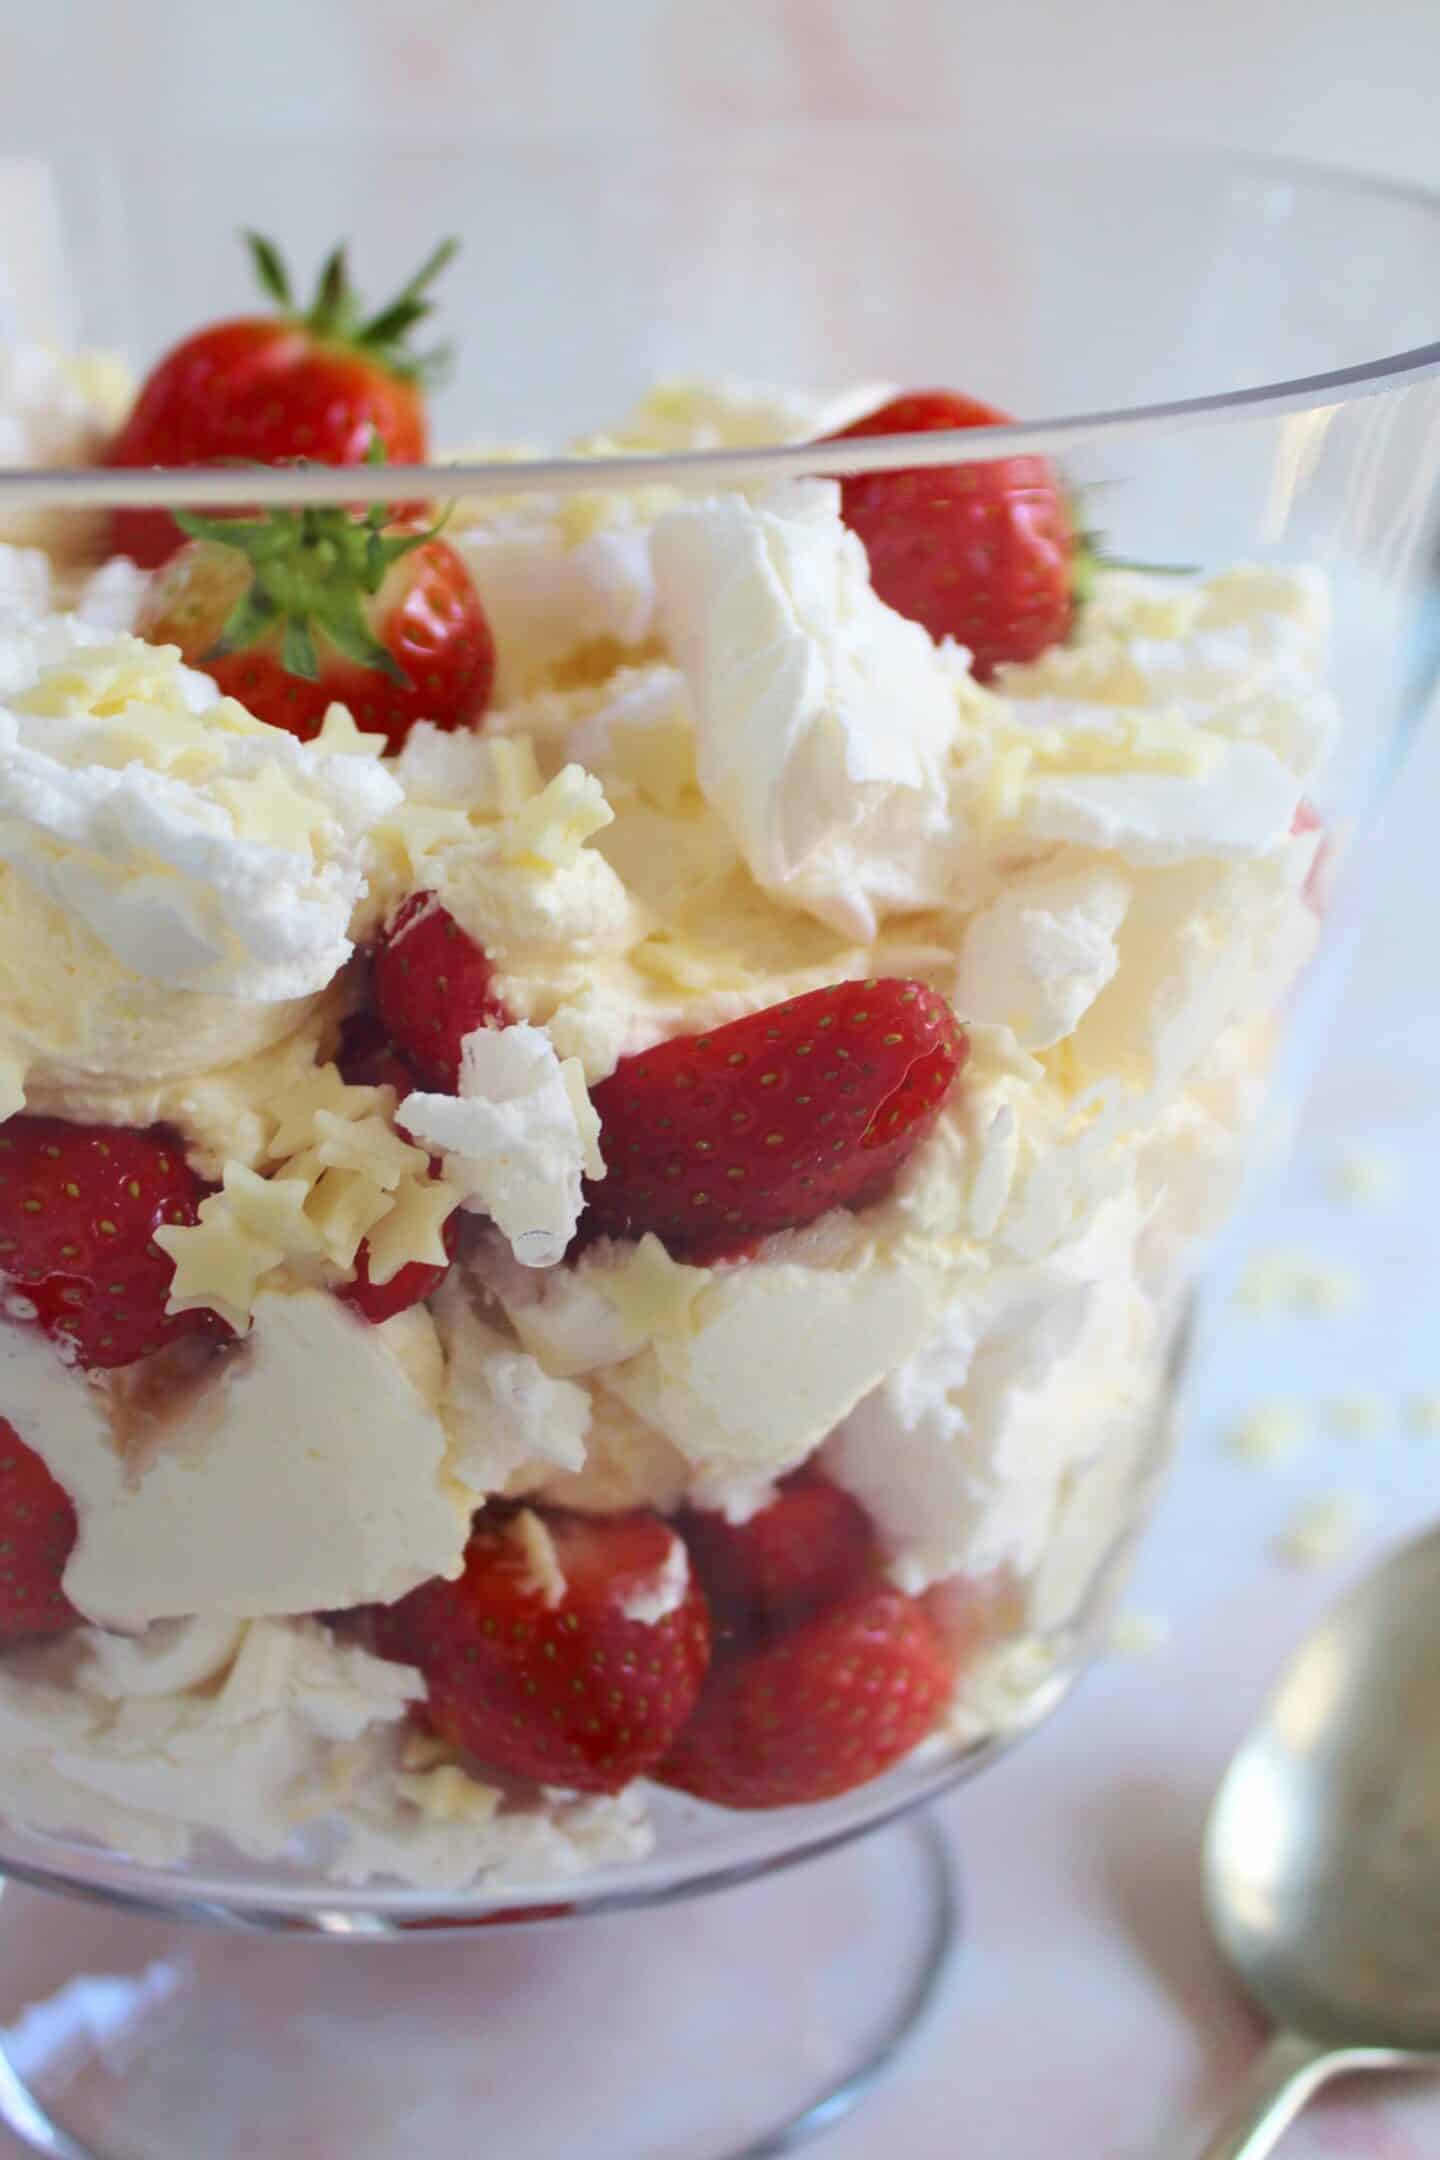 A close up of Eton Mess in a large glass dish.